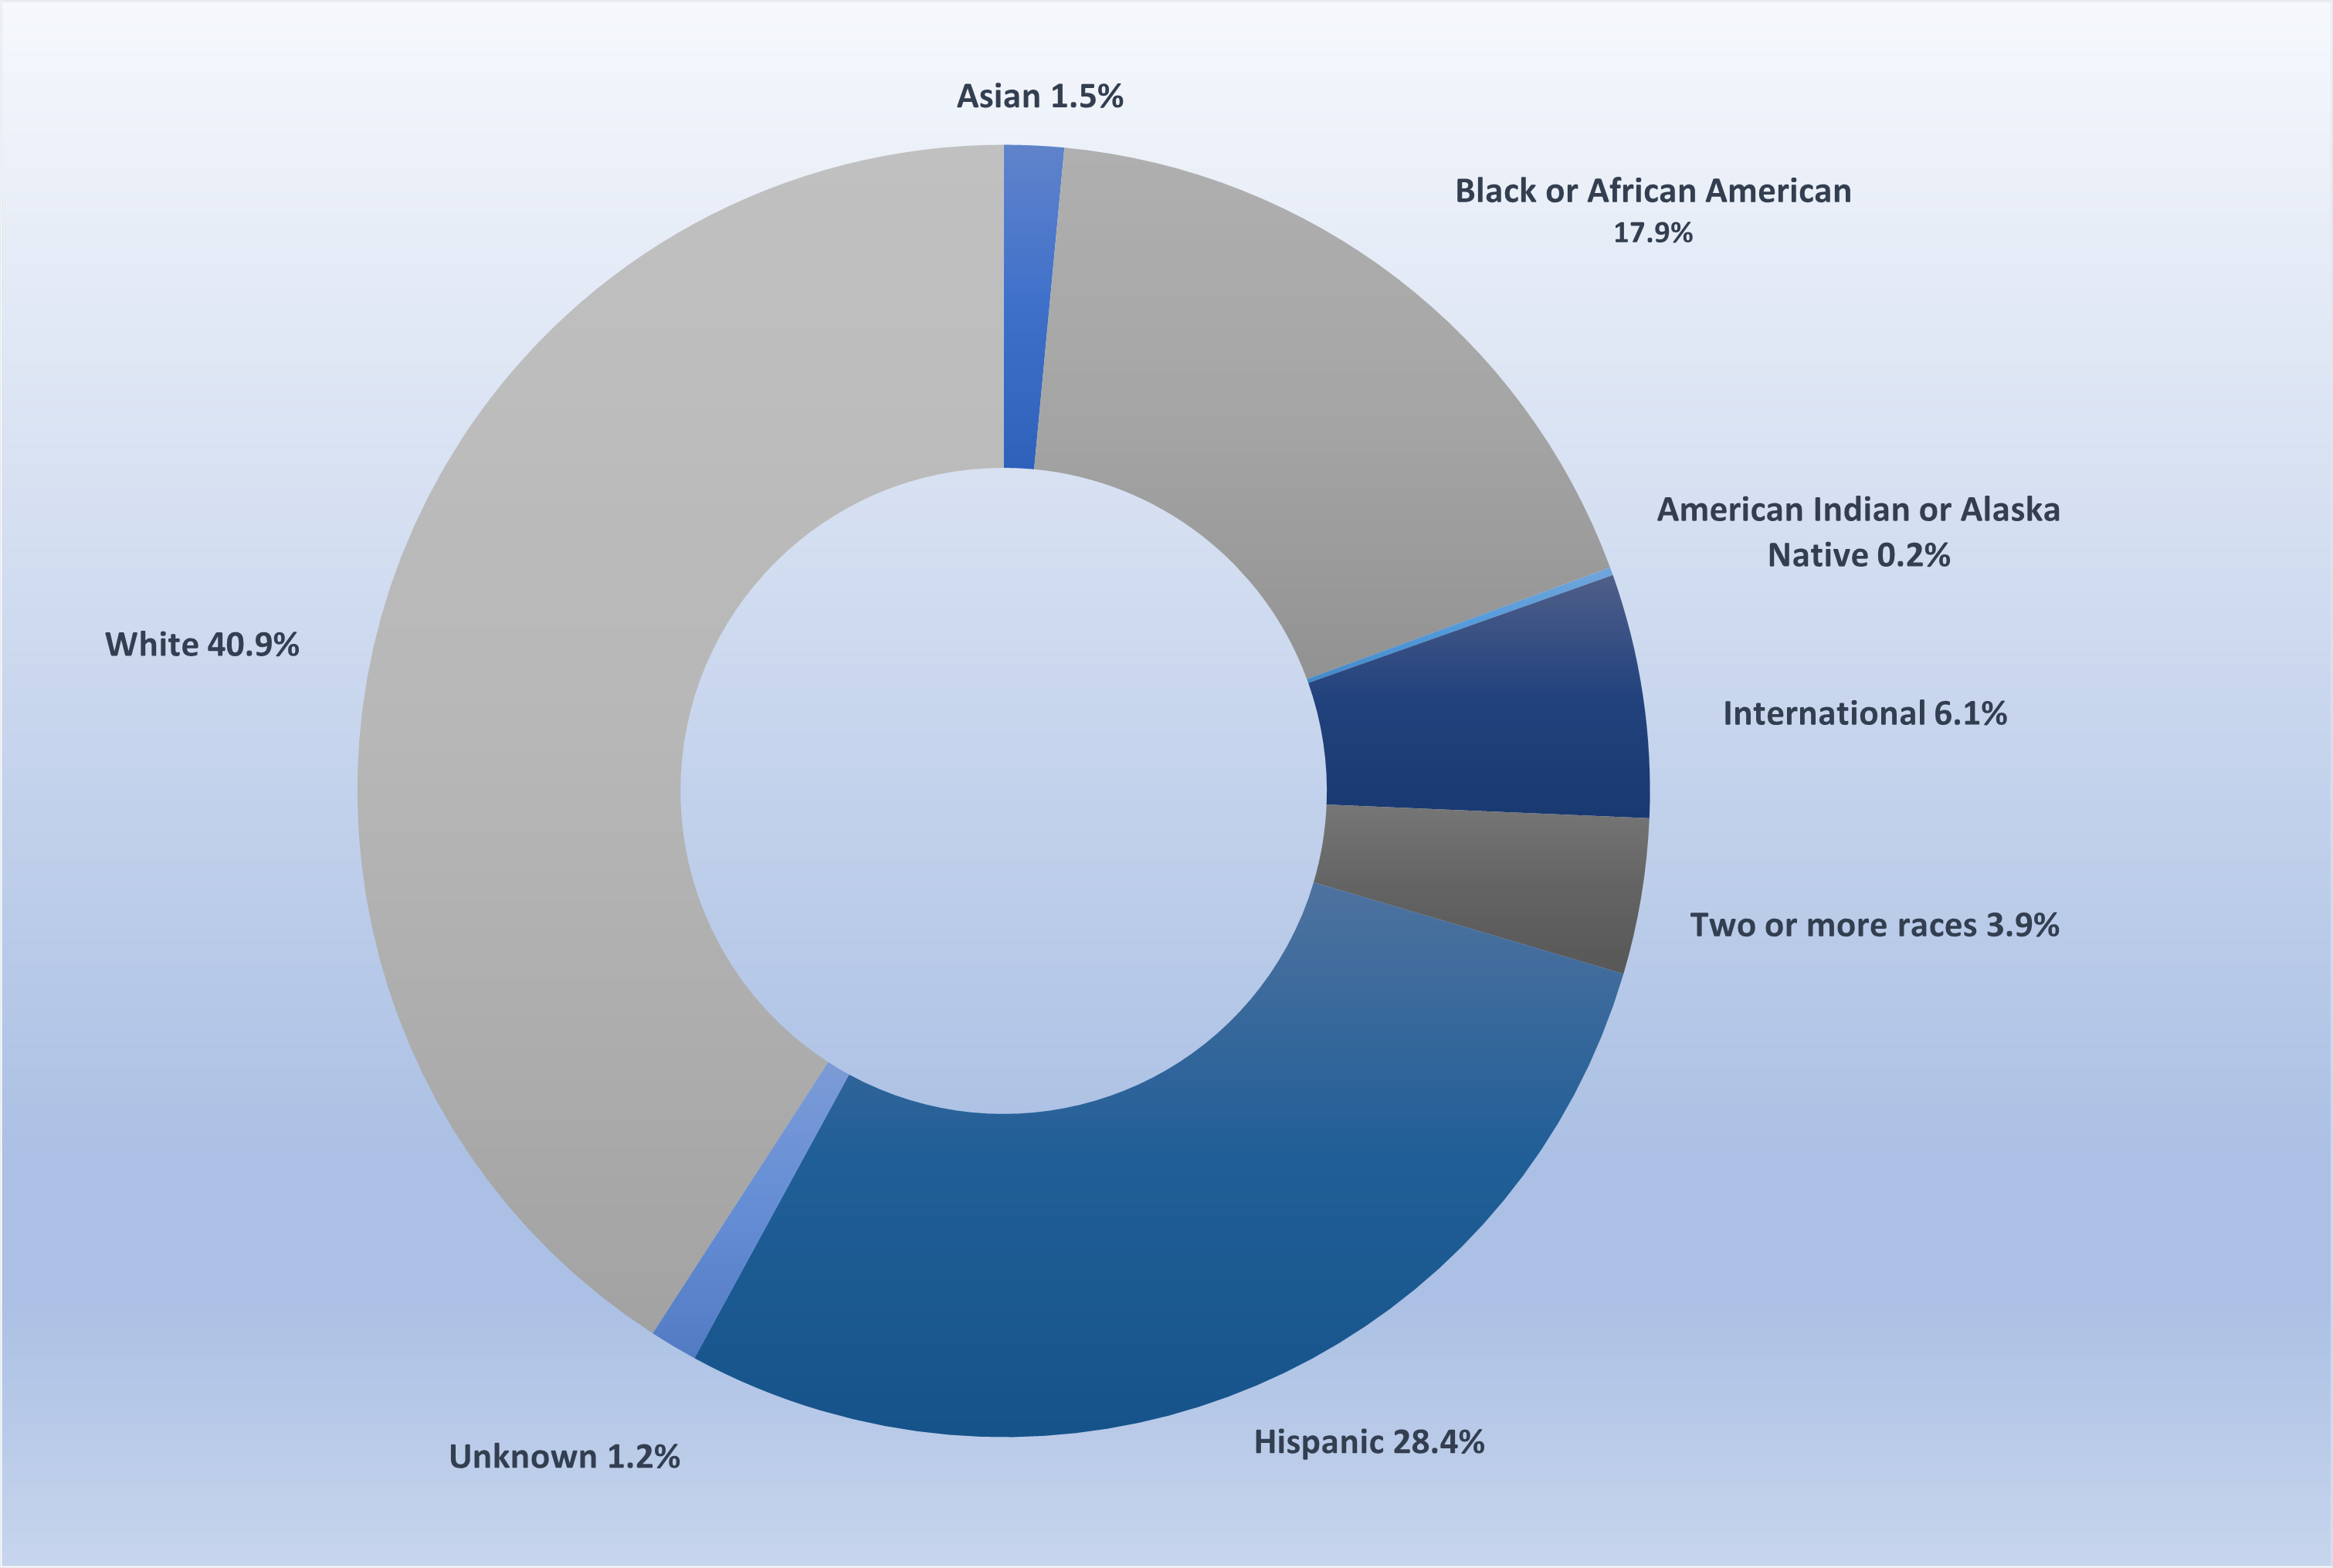 statistics graph American Indian or Alaska Native 0.2%, Asian 1.5%,Black or African American 17.9%,Hispanic 28.4%,Two or more races 3.9%,White 40.9%, International 6.1%, Unknown 1.2%